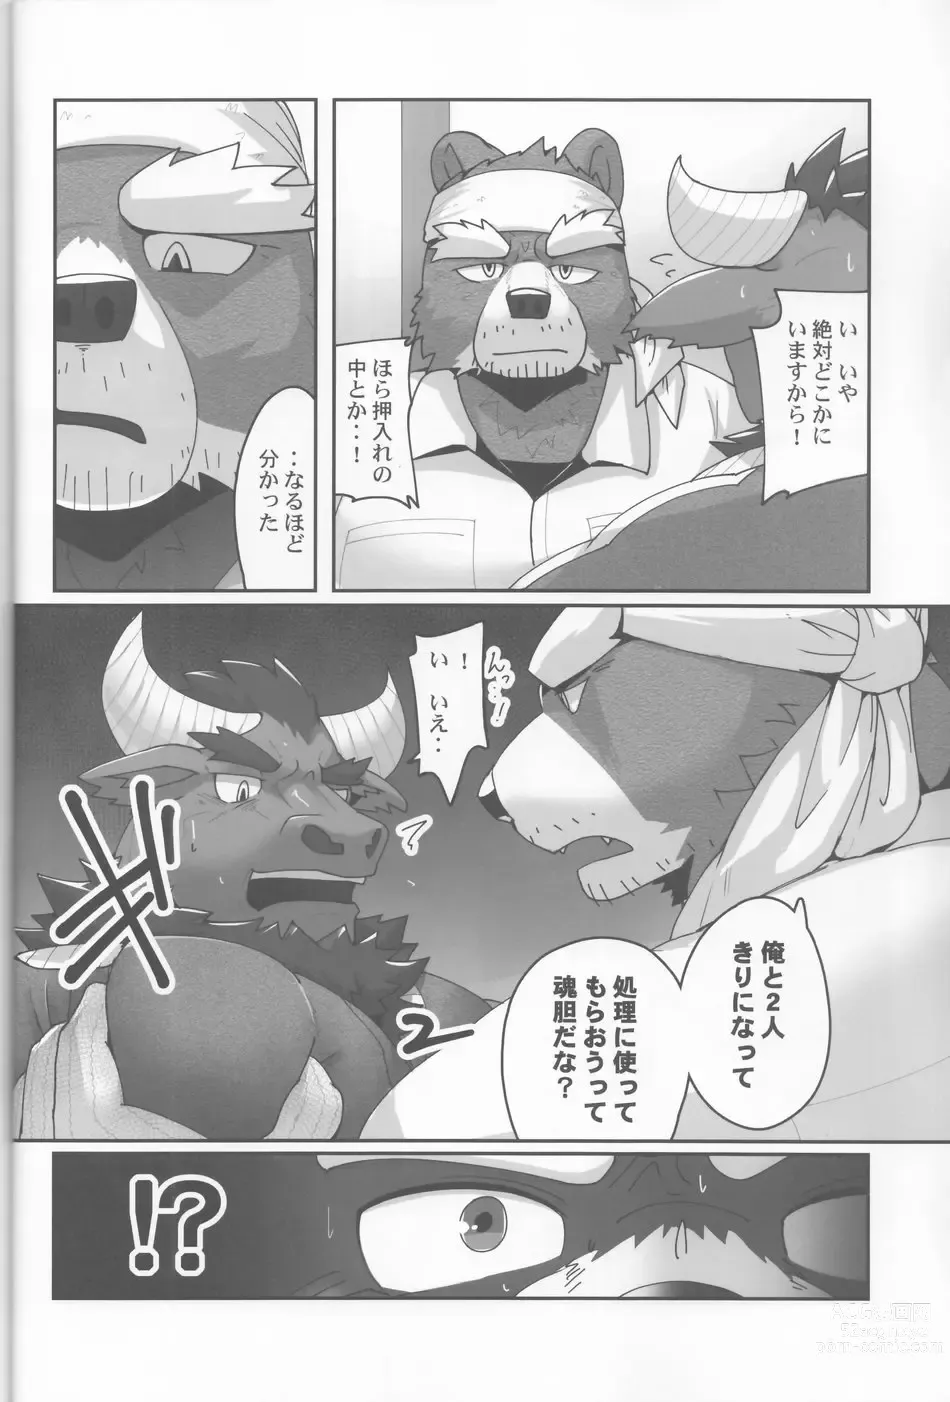 Page 9 of doujinshi The Janitor raises Cock slaves in the Staff Room